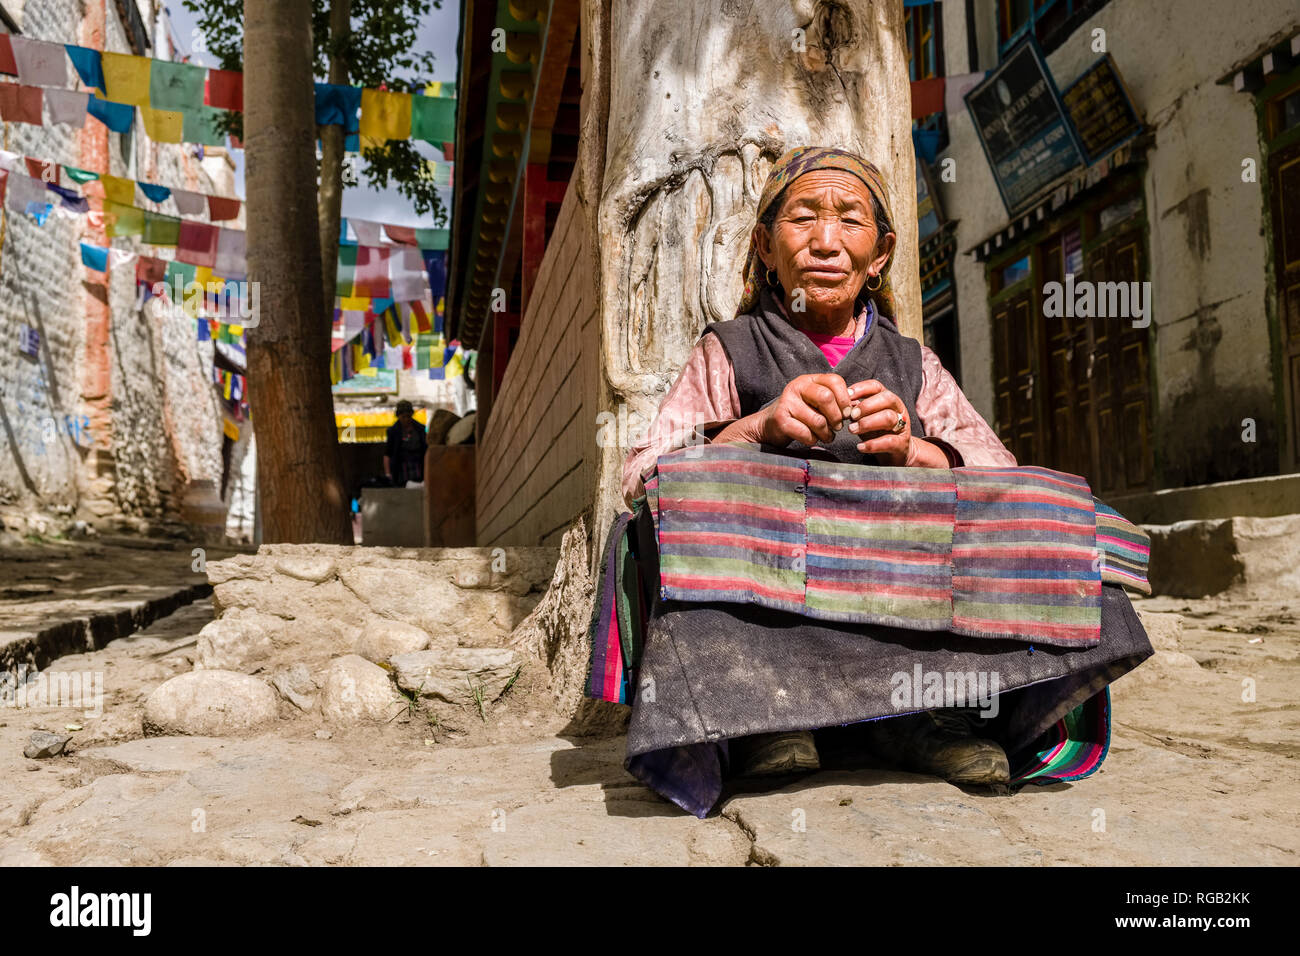 A local woman is sitting at a wall with prayer wheels and colorful prayer flags inside the walled town Stock Photo